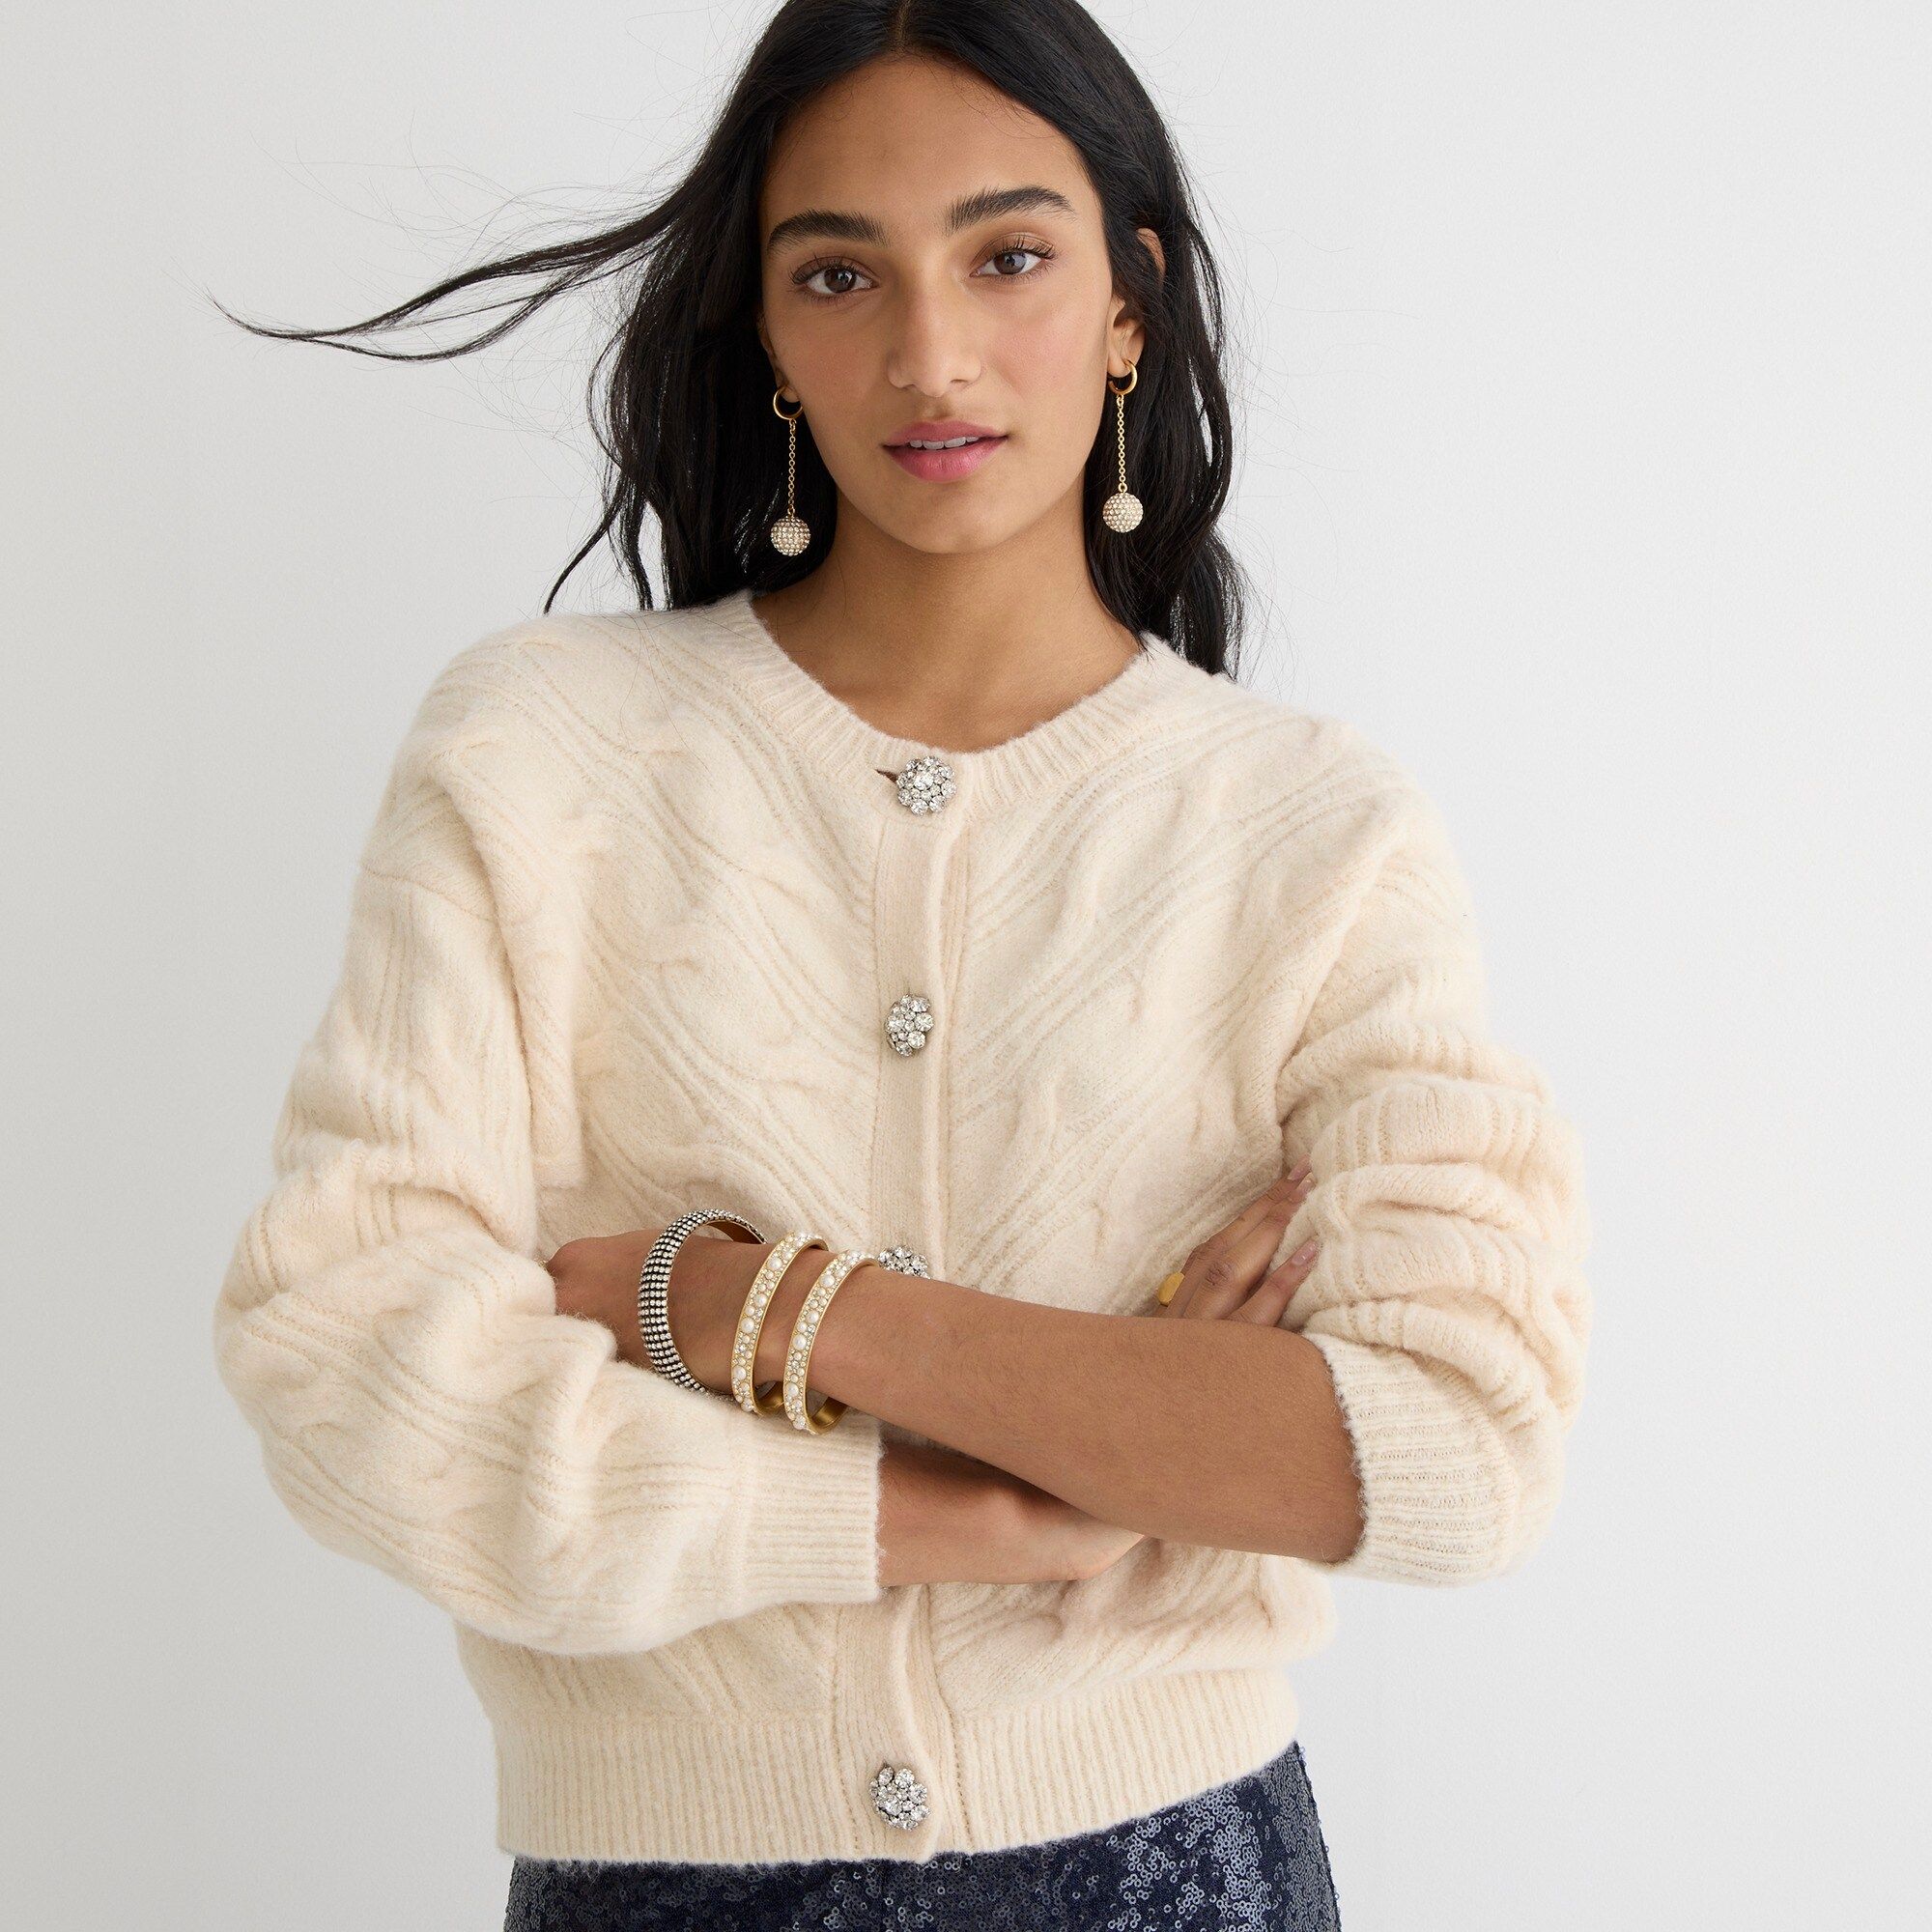 Cable-knit cardigan sweater with jewel buttons | J.Crew US